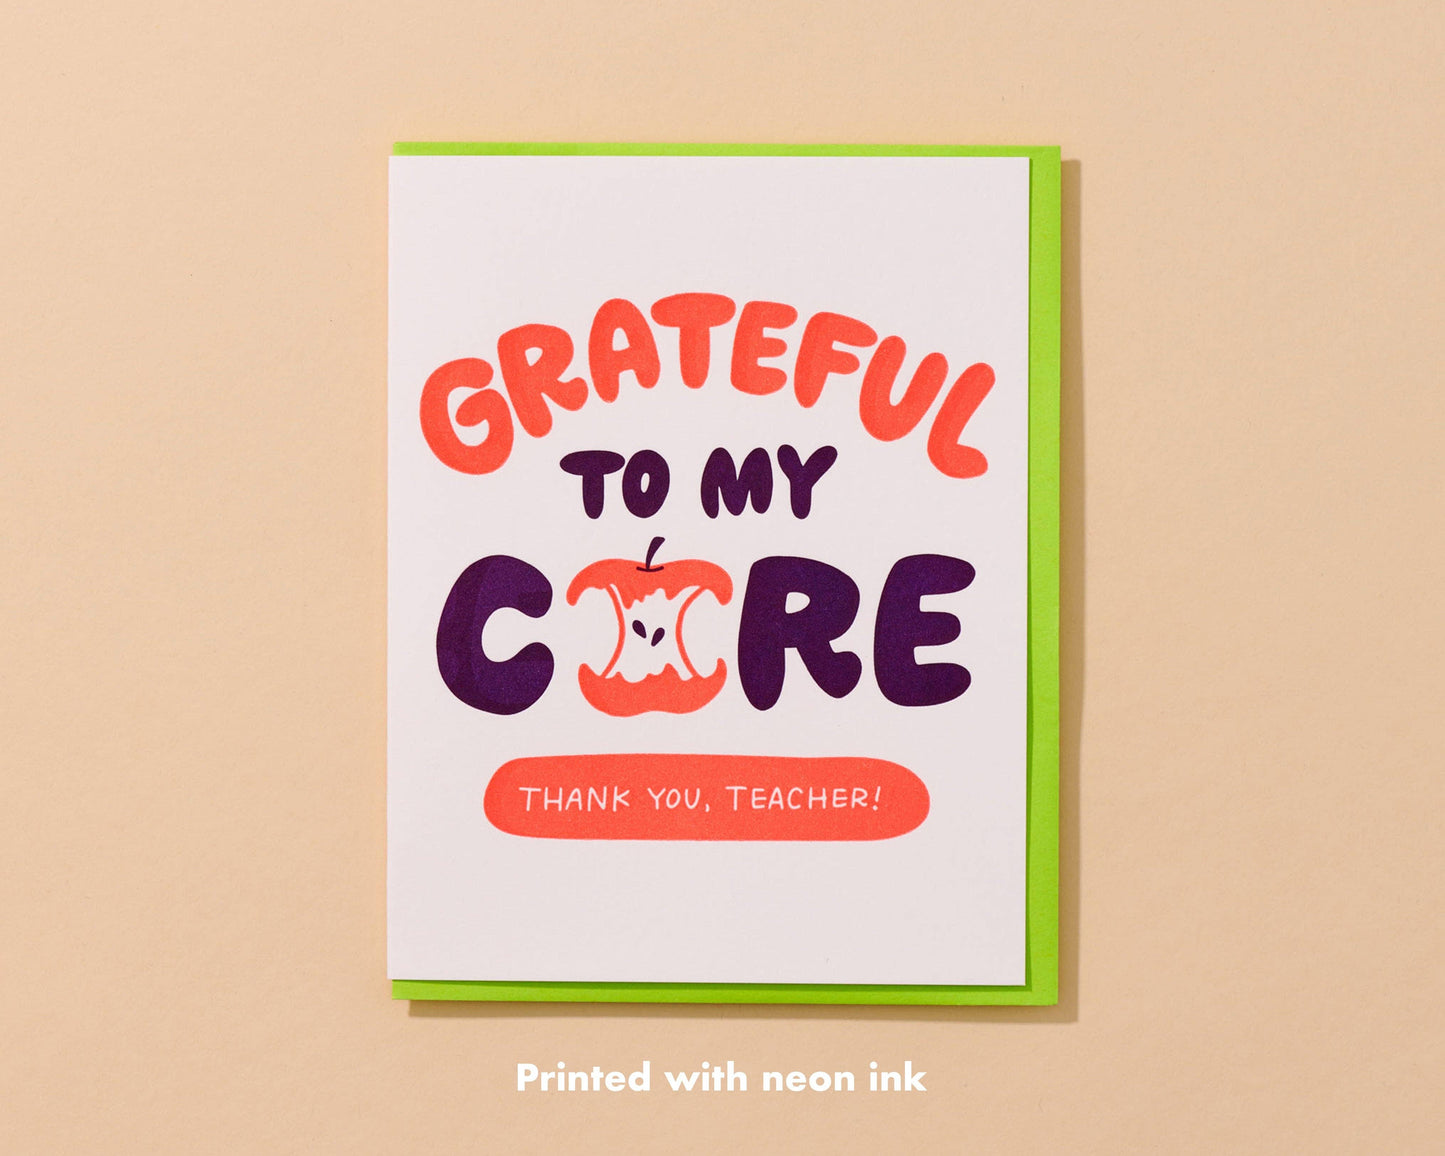 Card reads: "Grateful to my core/ Thank you, teacher!" with an image of an apple core